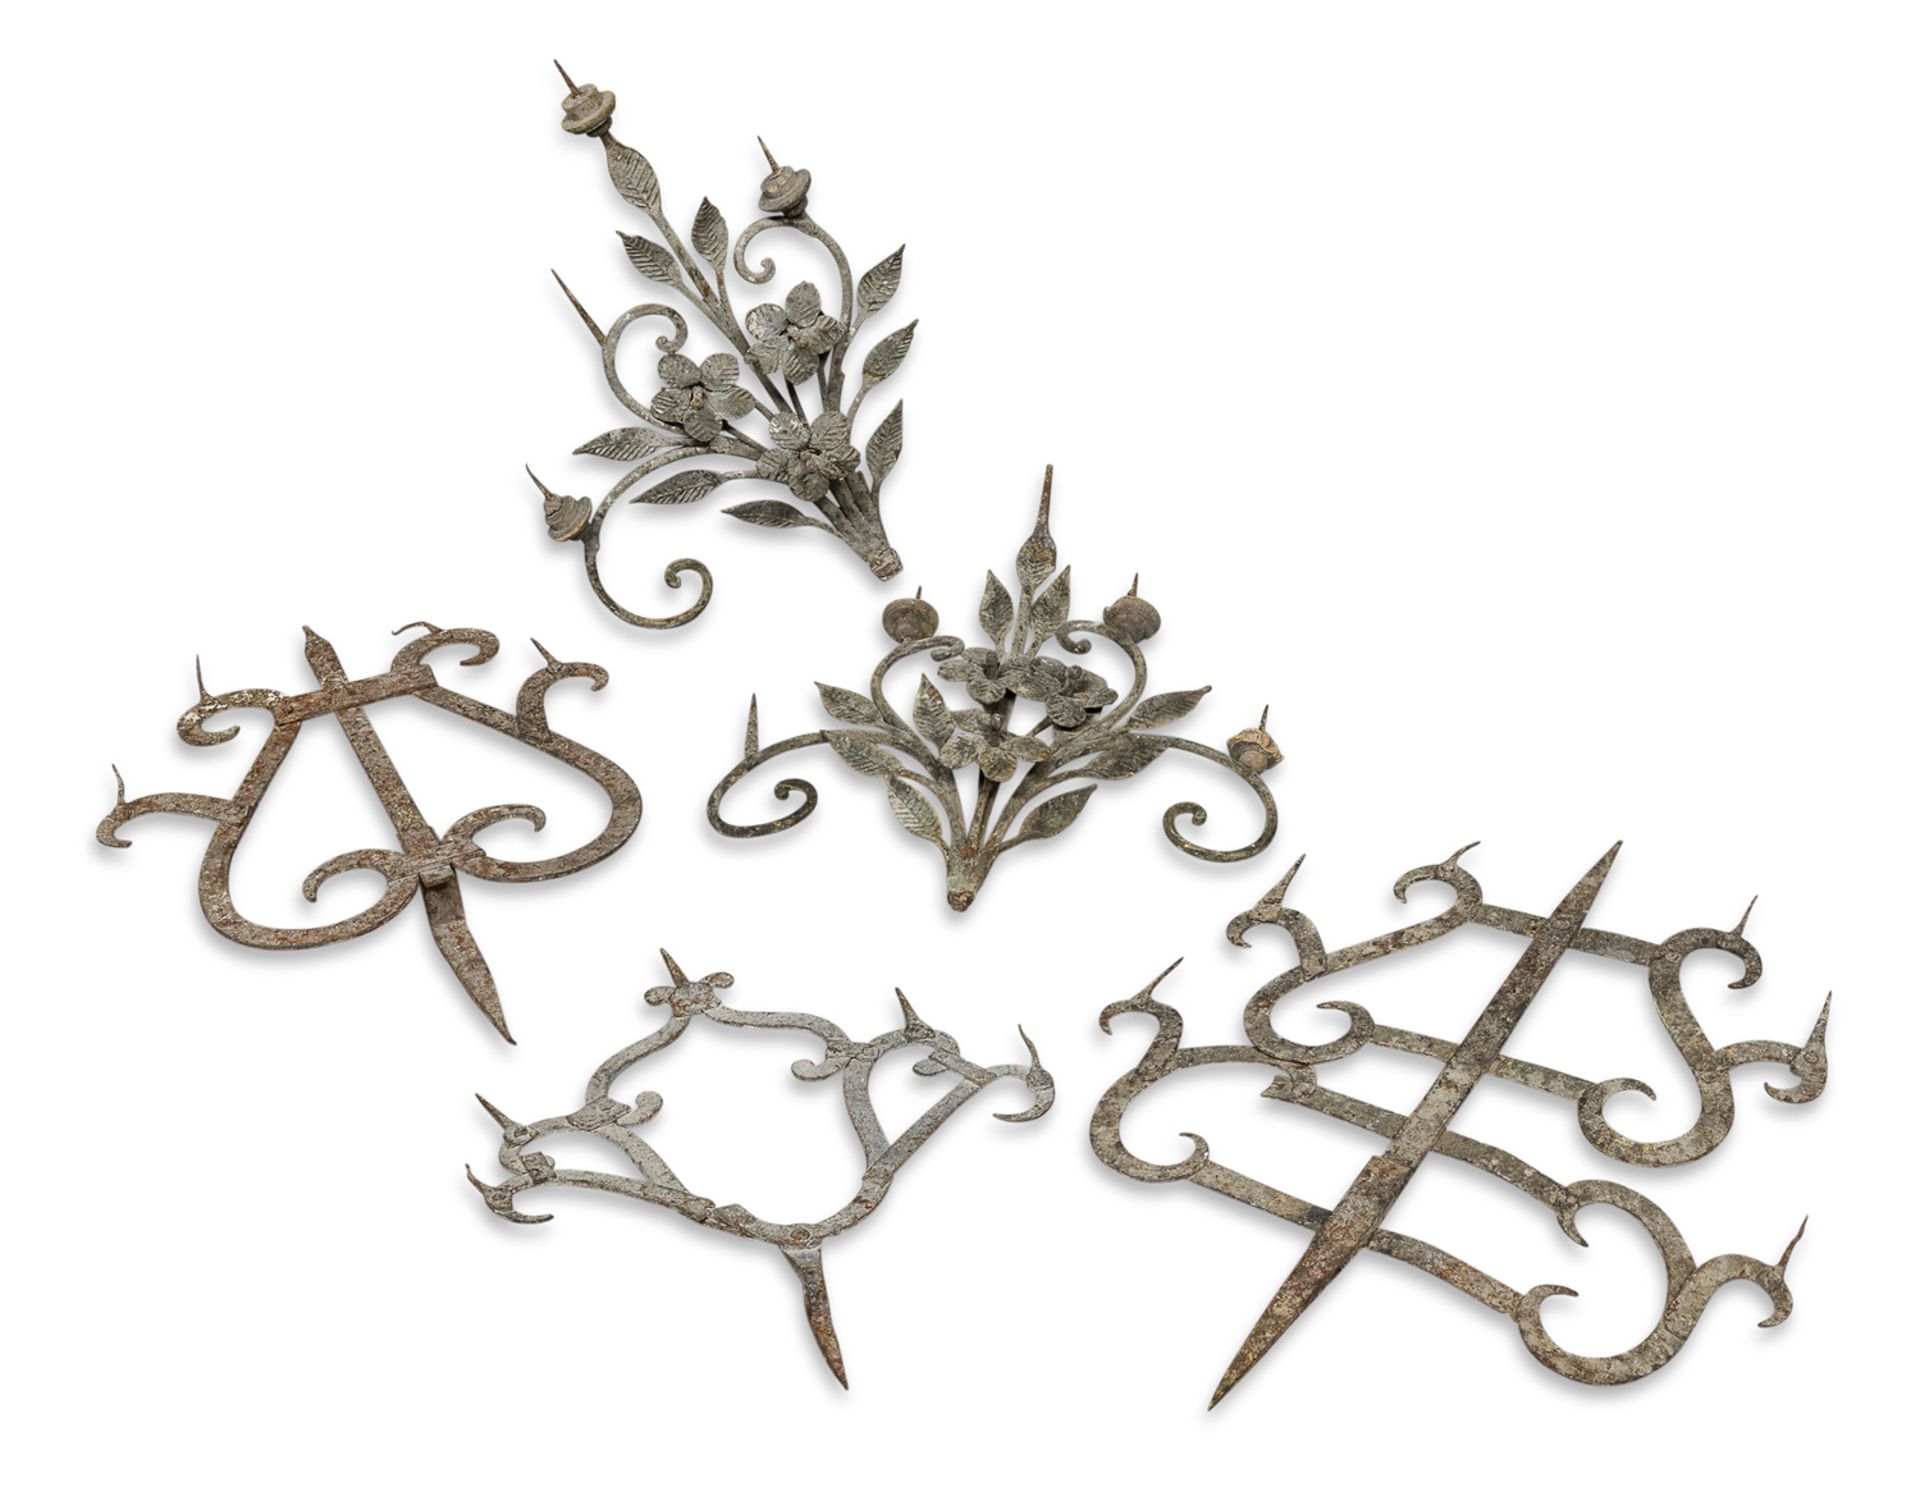 FIVE FRIEZES IN WROUGHT IRON 17th CENTURY